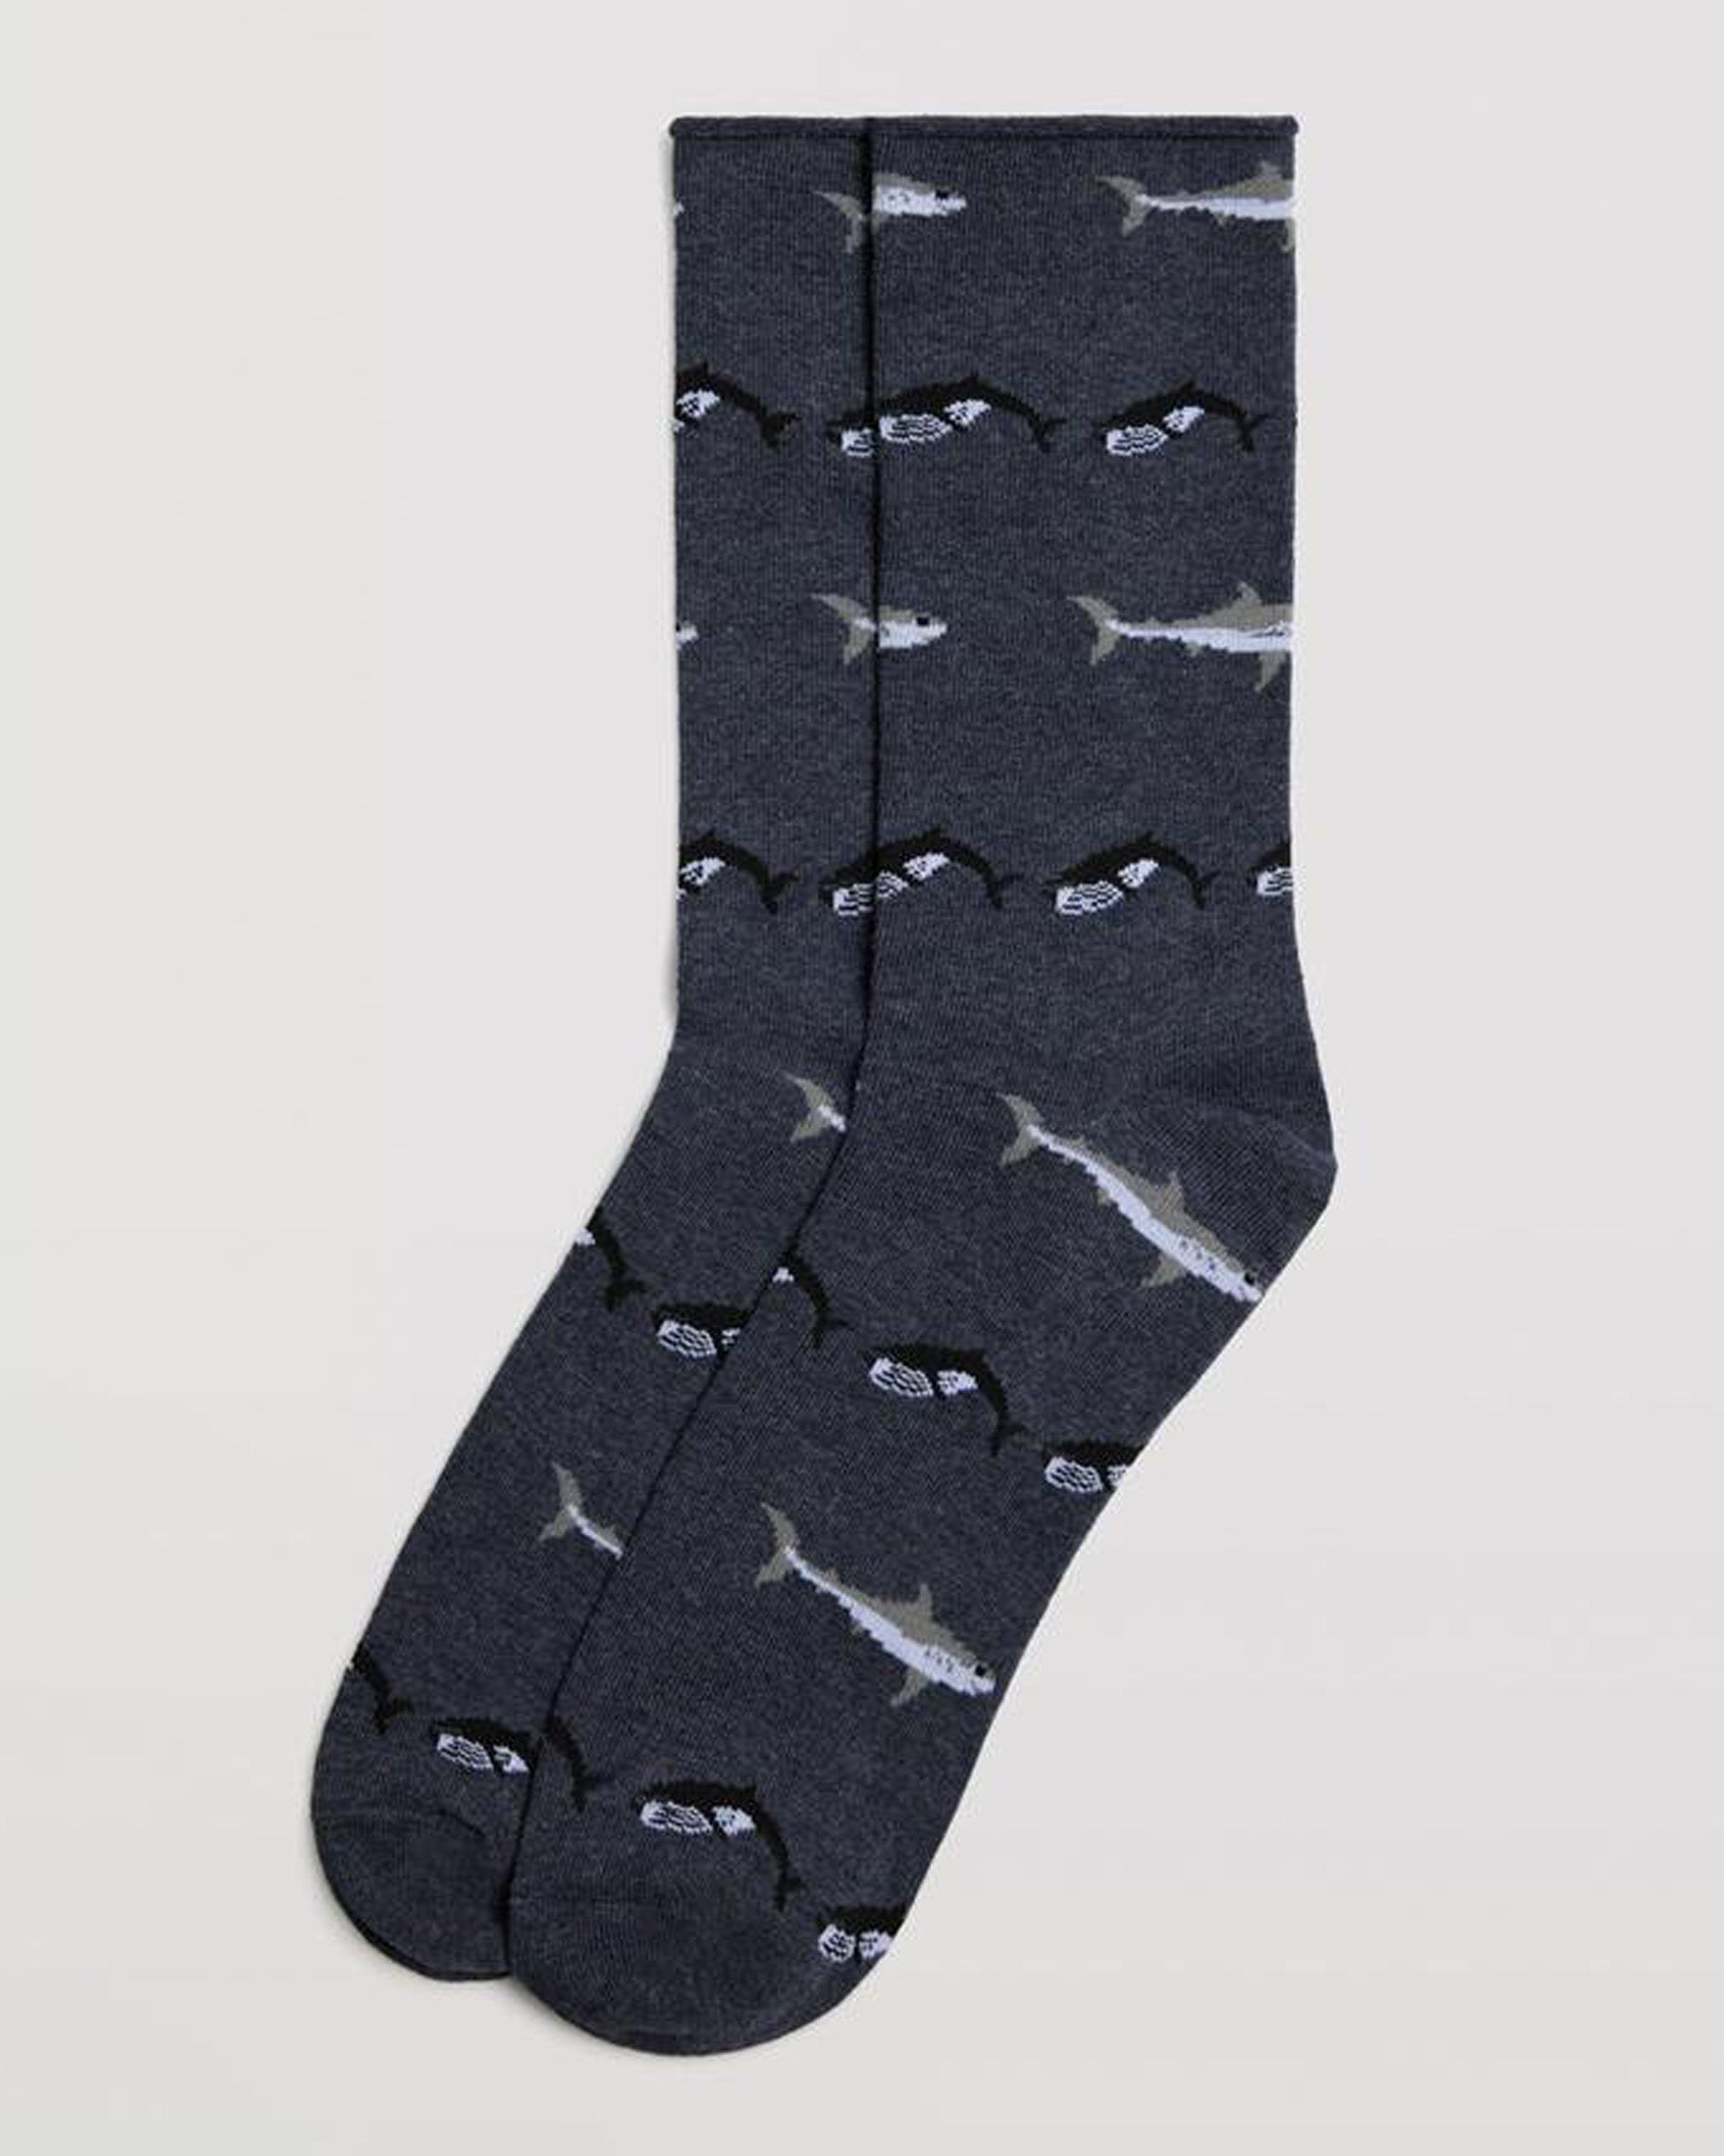 Ysabel Mora 22881 Shark Socks - Denim blue no cuff cotton mix crew length ankle socks with wales and sharks pattern.